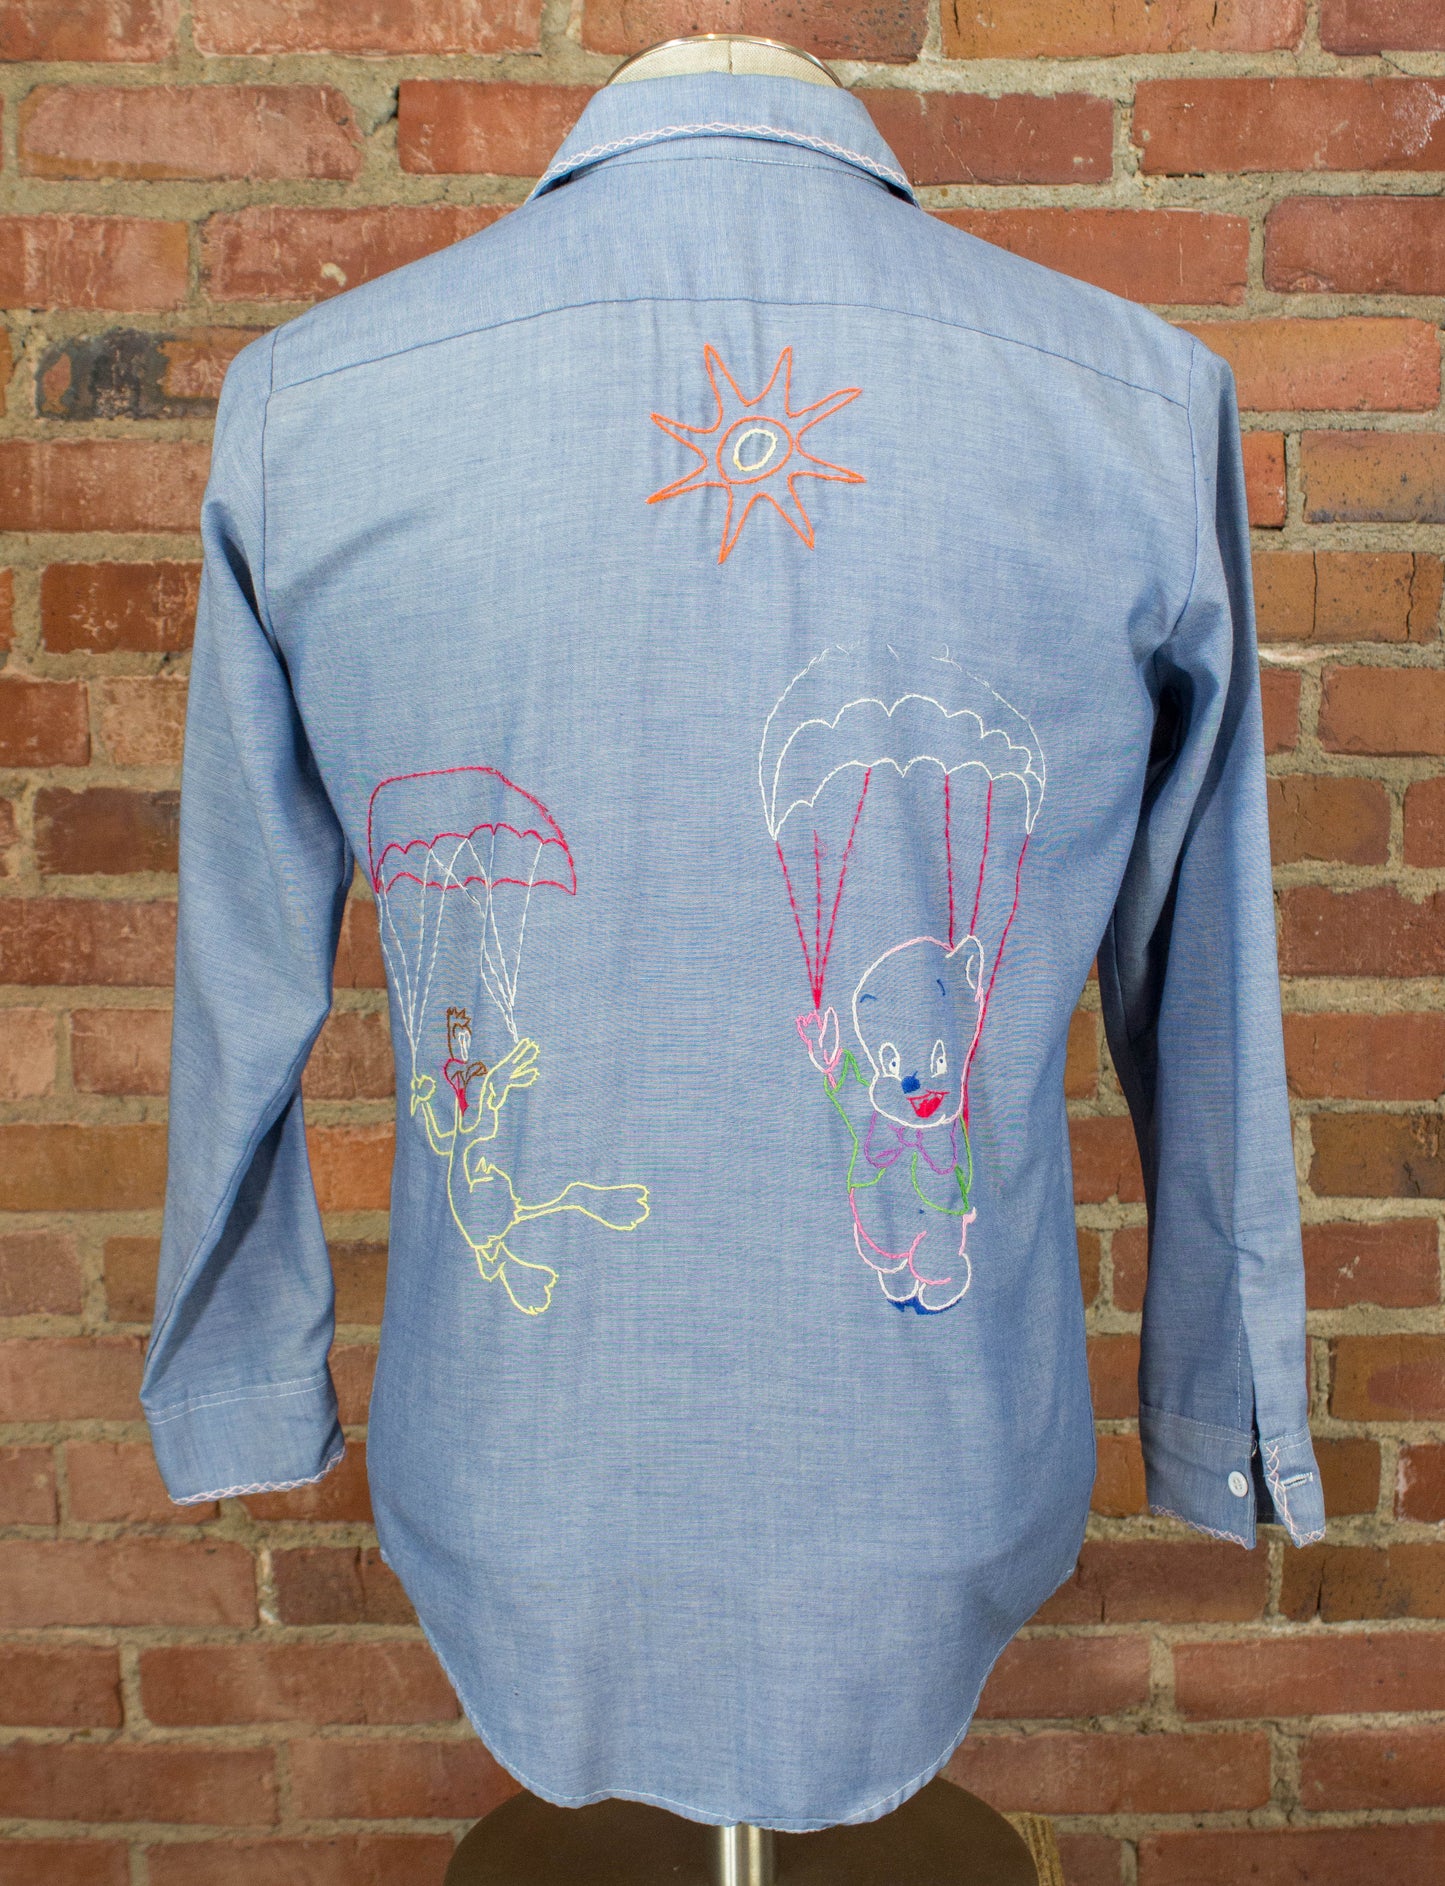 Vintage King Kole Hand Embroidered Chambray Shirt 70s Light Blue Small